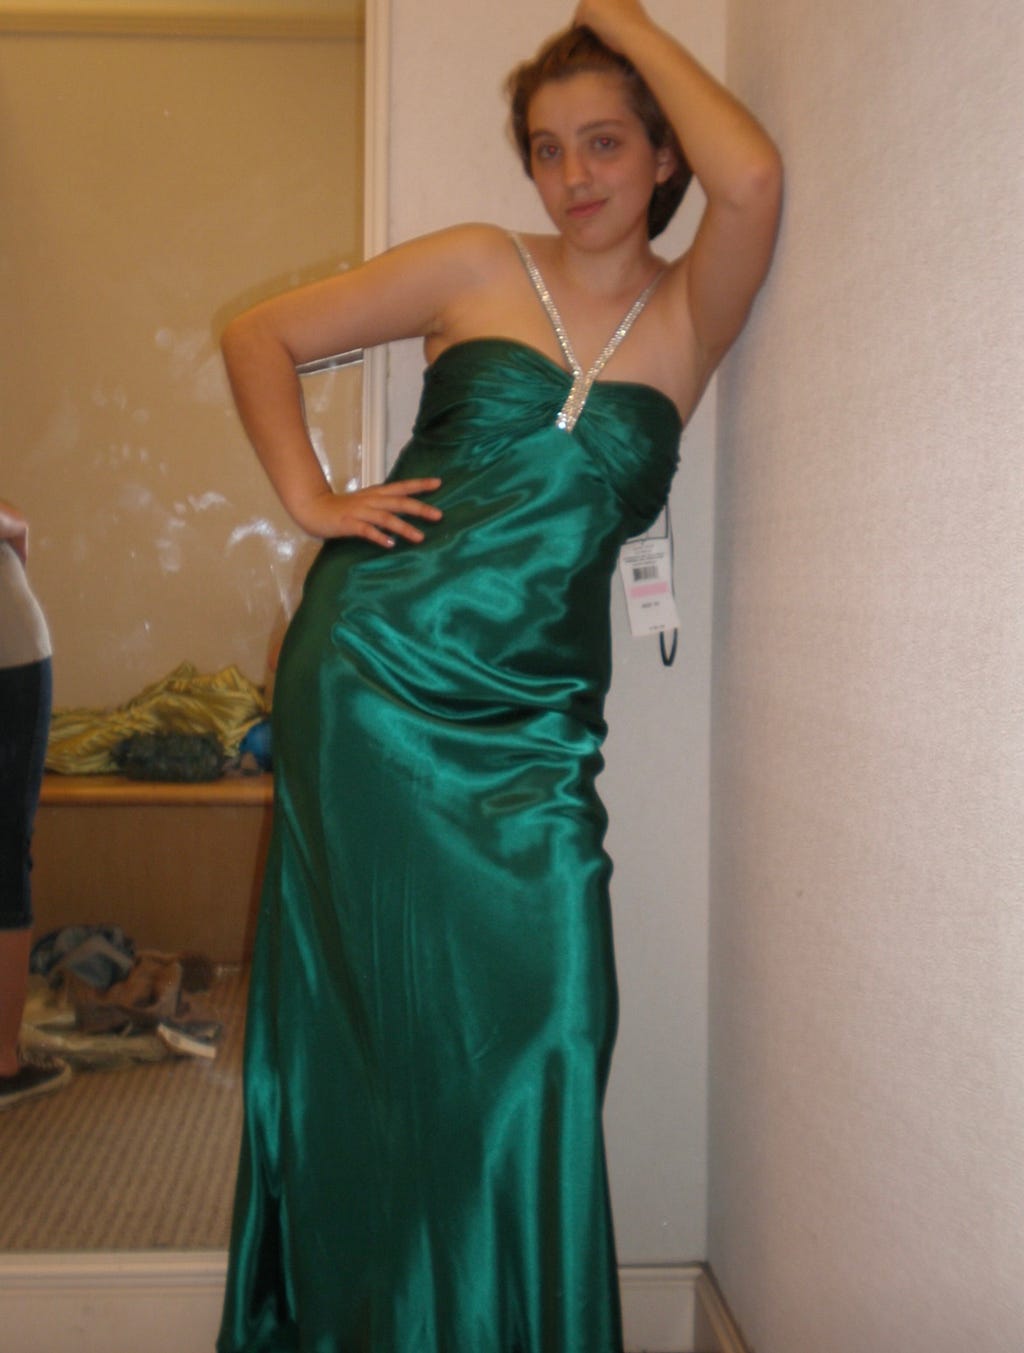 A young white teenage girl strikes a post in an emerald green floor-length gown in a dressing room. She has short brown hair and one of her hands is on her hip while the other is resting against the wall. A tag is hanging from the dress and a mirror is visible in the background.